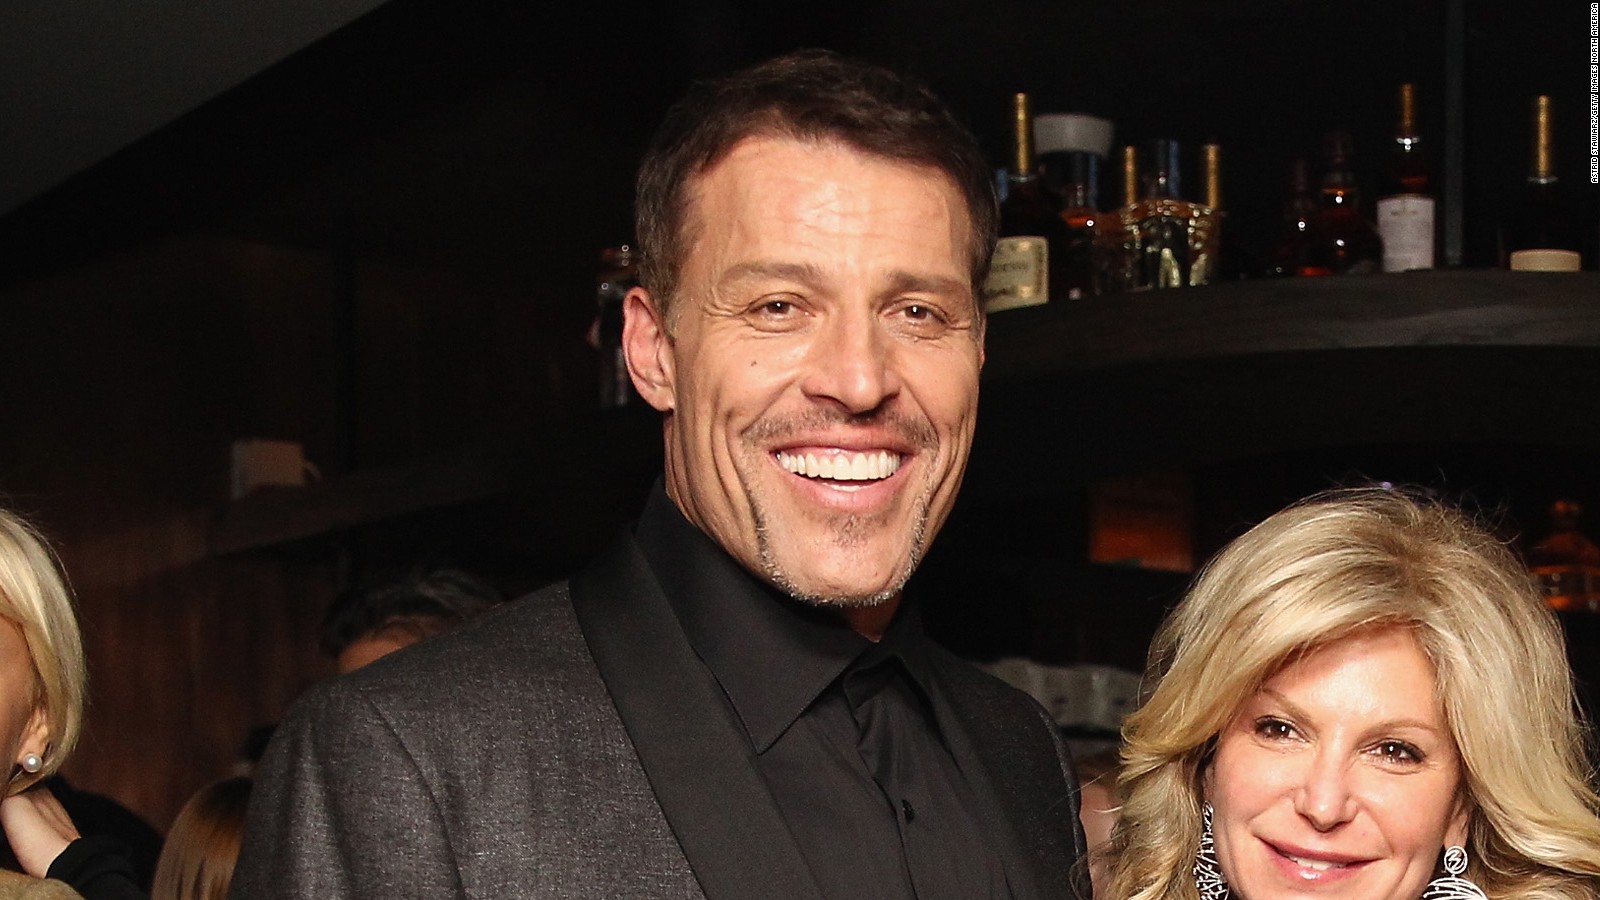 Becky with her ex-husband Tony Robbins.